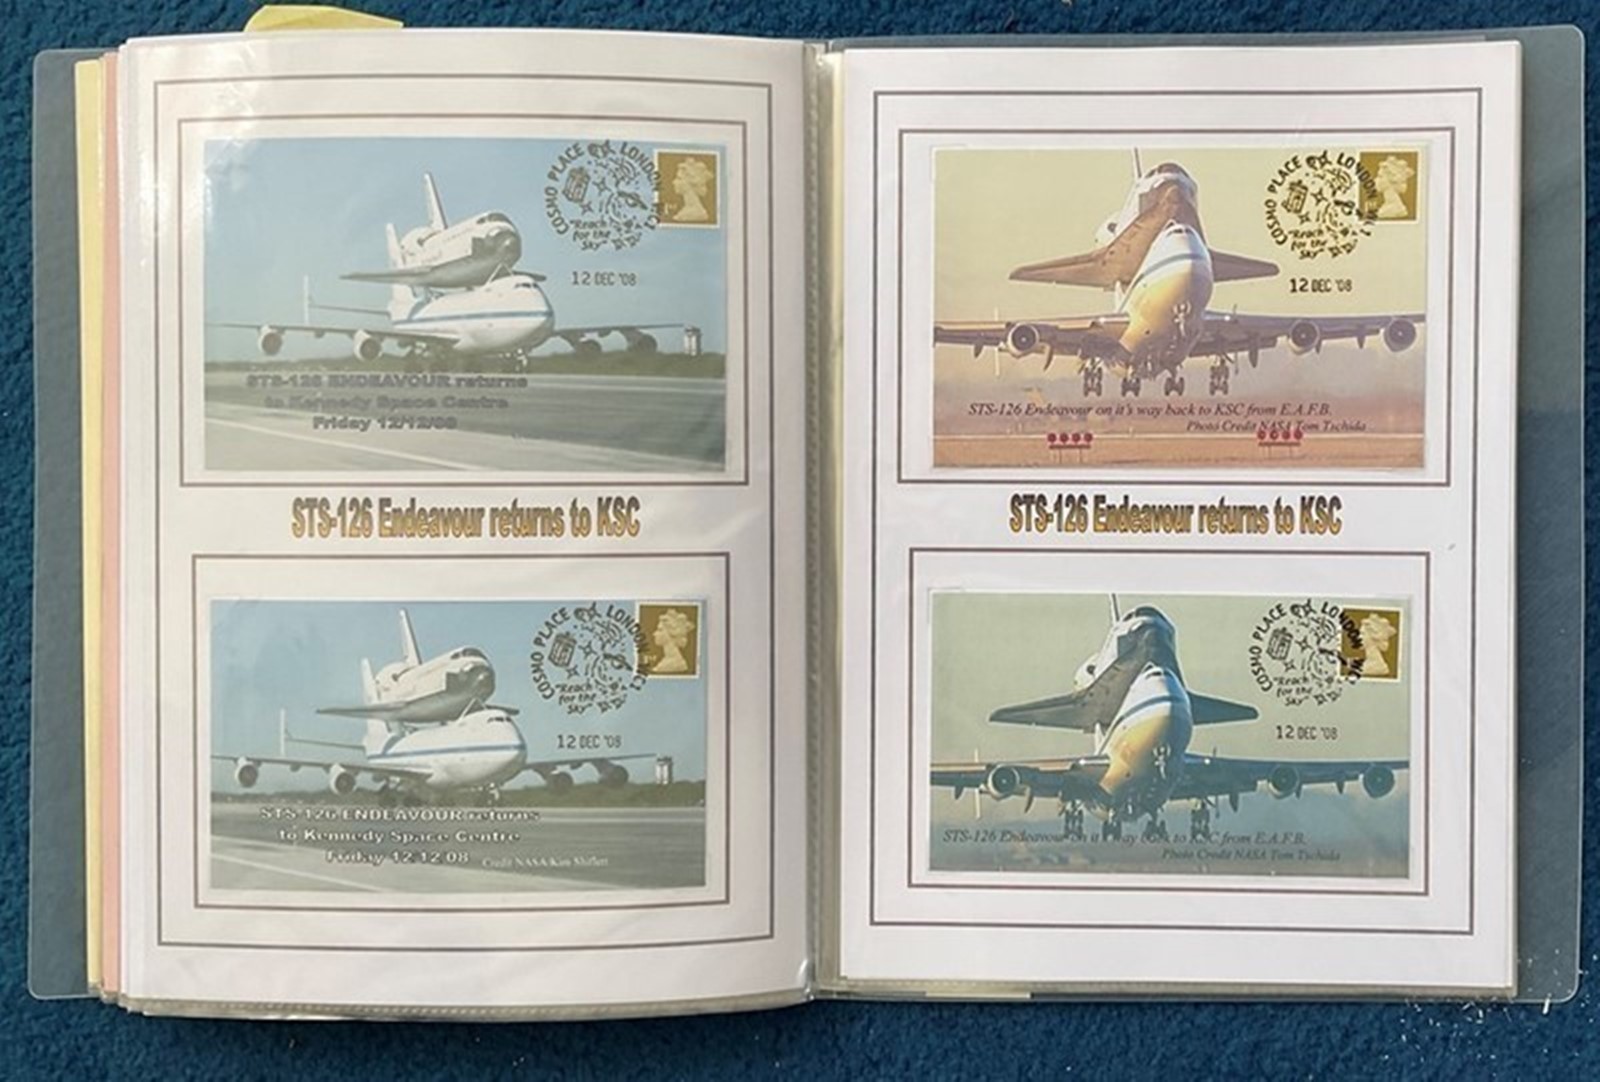 59 Space Exploration FDC with Stamps and FDI Postmarks, Housed in a Binder - Image 3 of 4